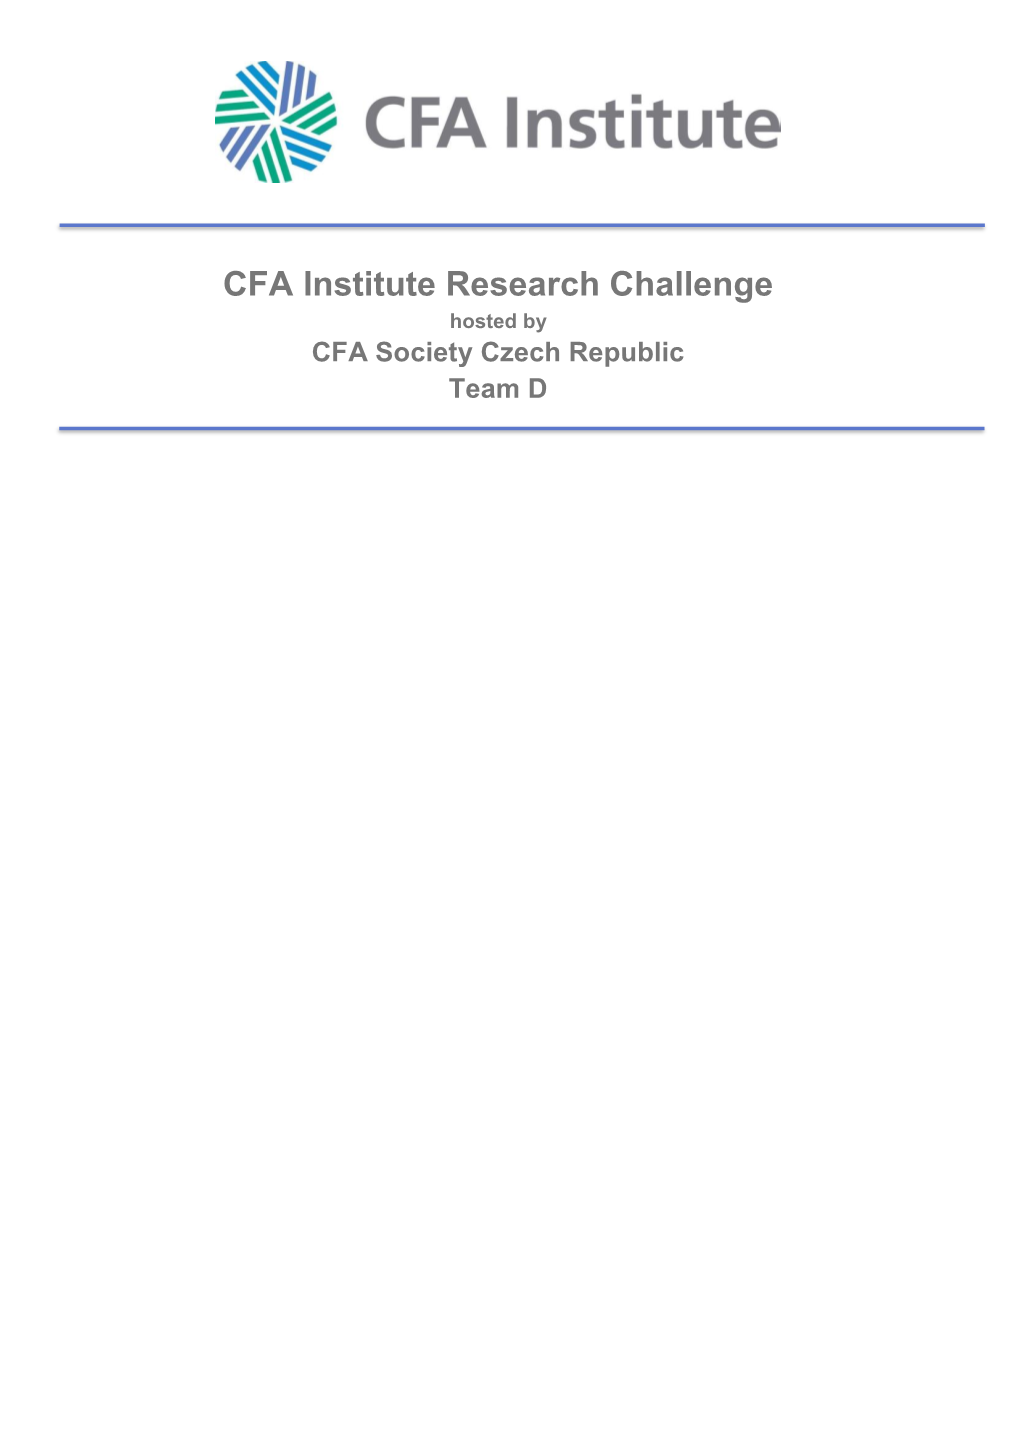 CFA Institute Research Challenge Hosted by CFA Society Czech Republic Team D